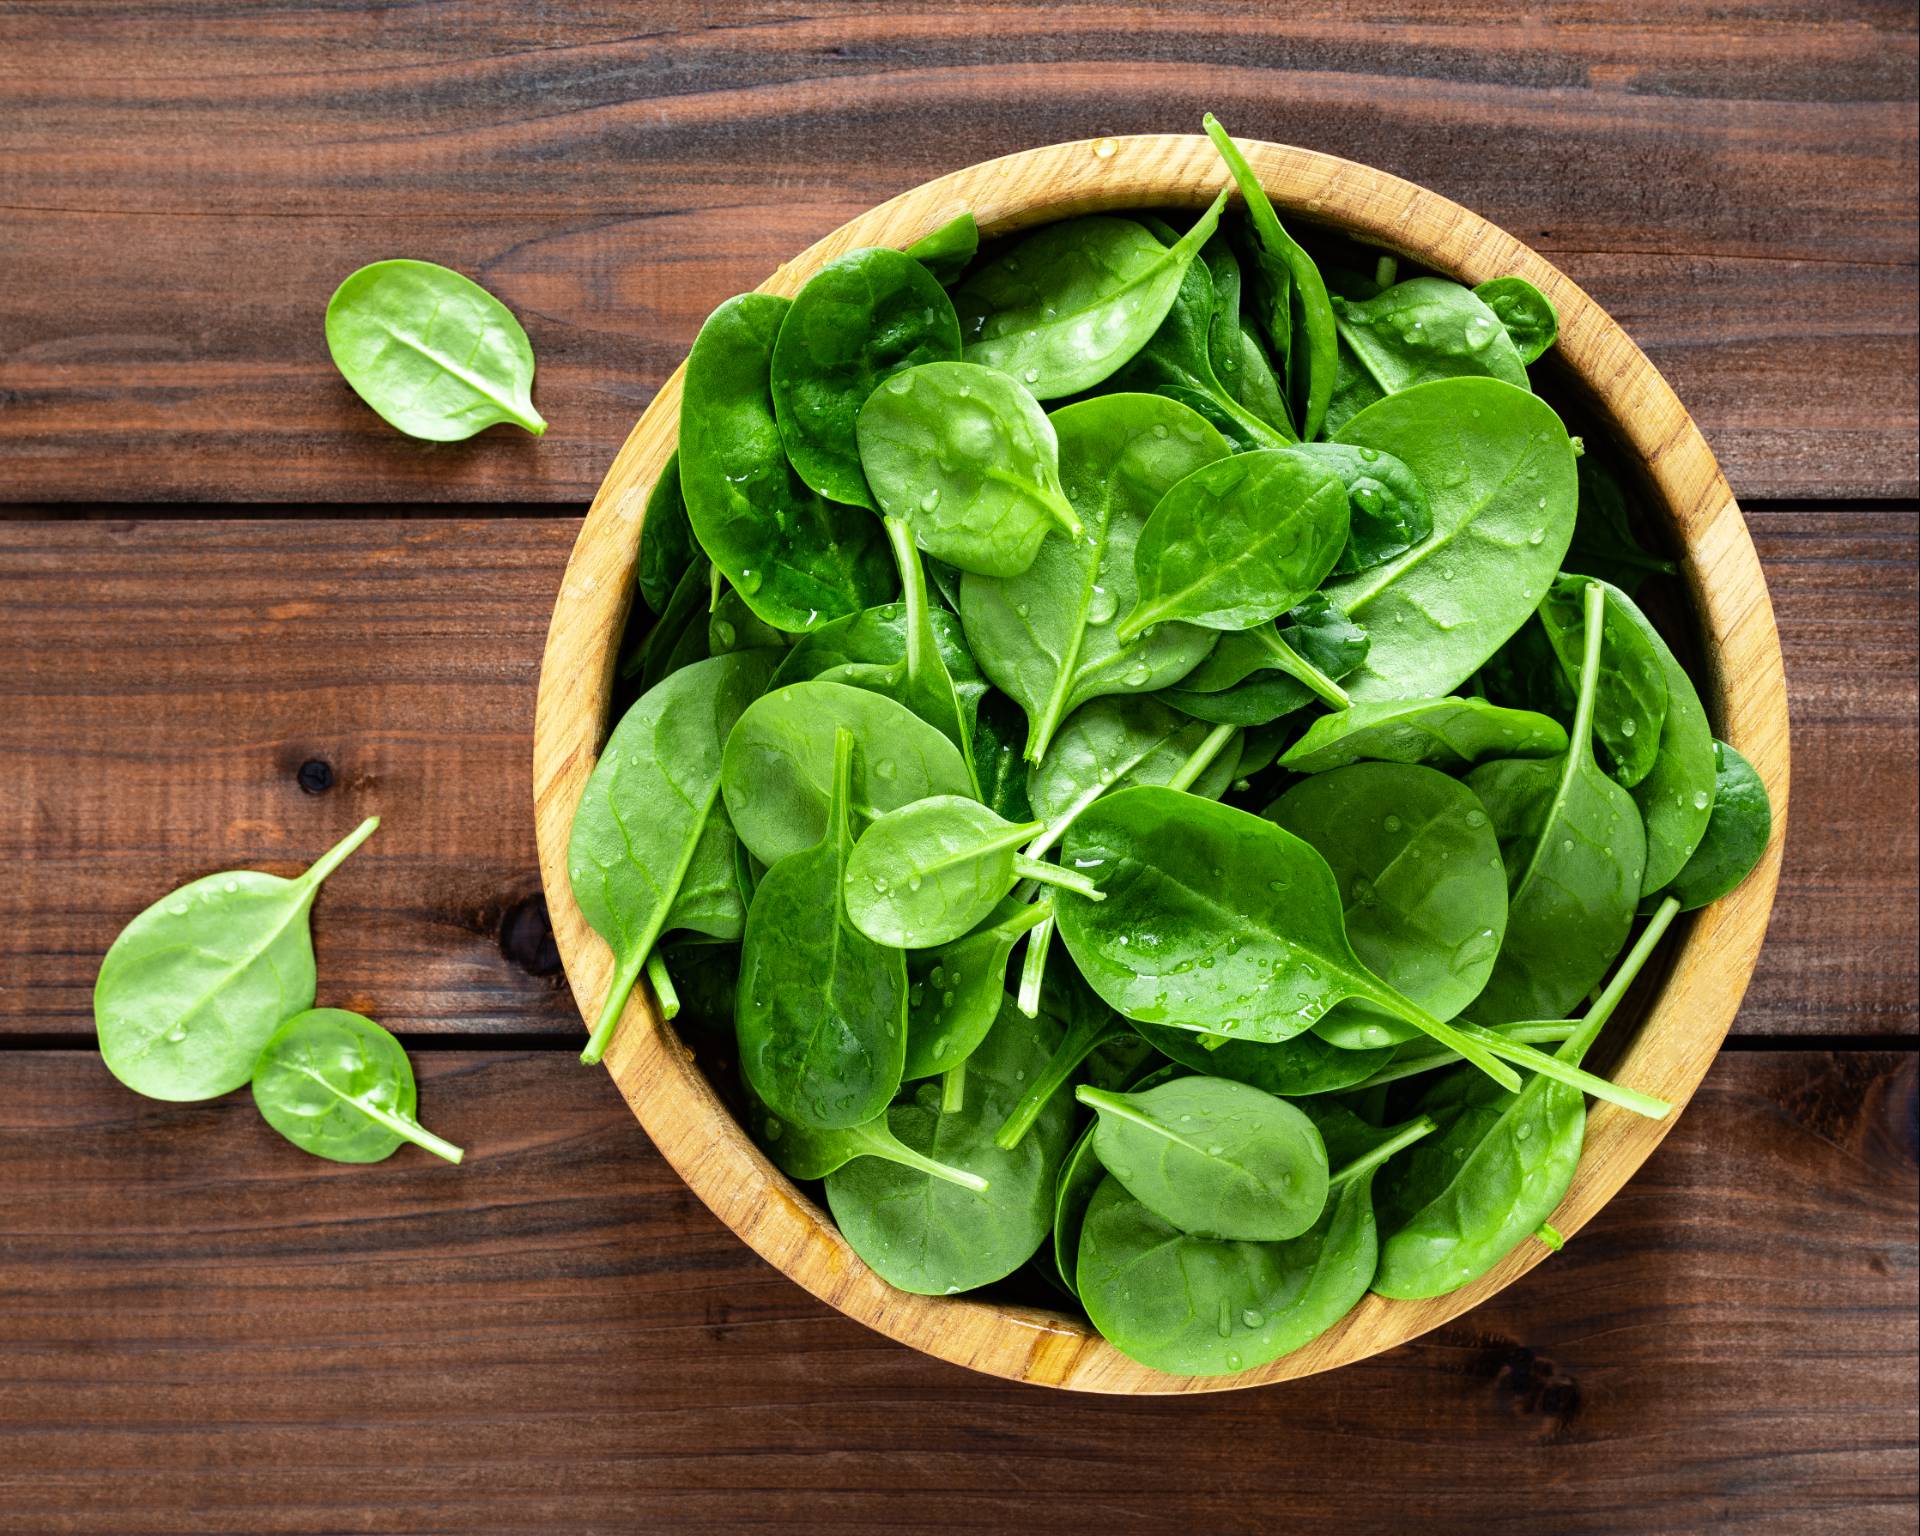 A photograph of a bowl of fresh spinach on a wooden background.